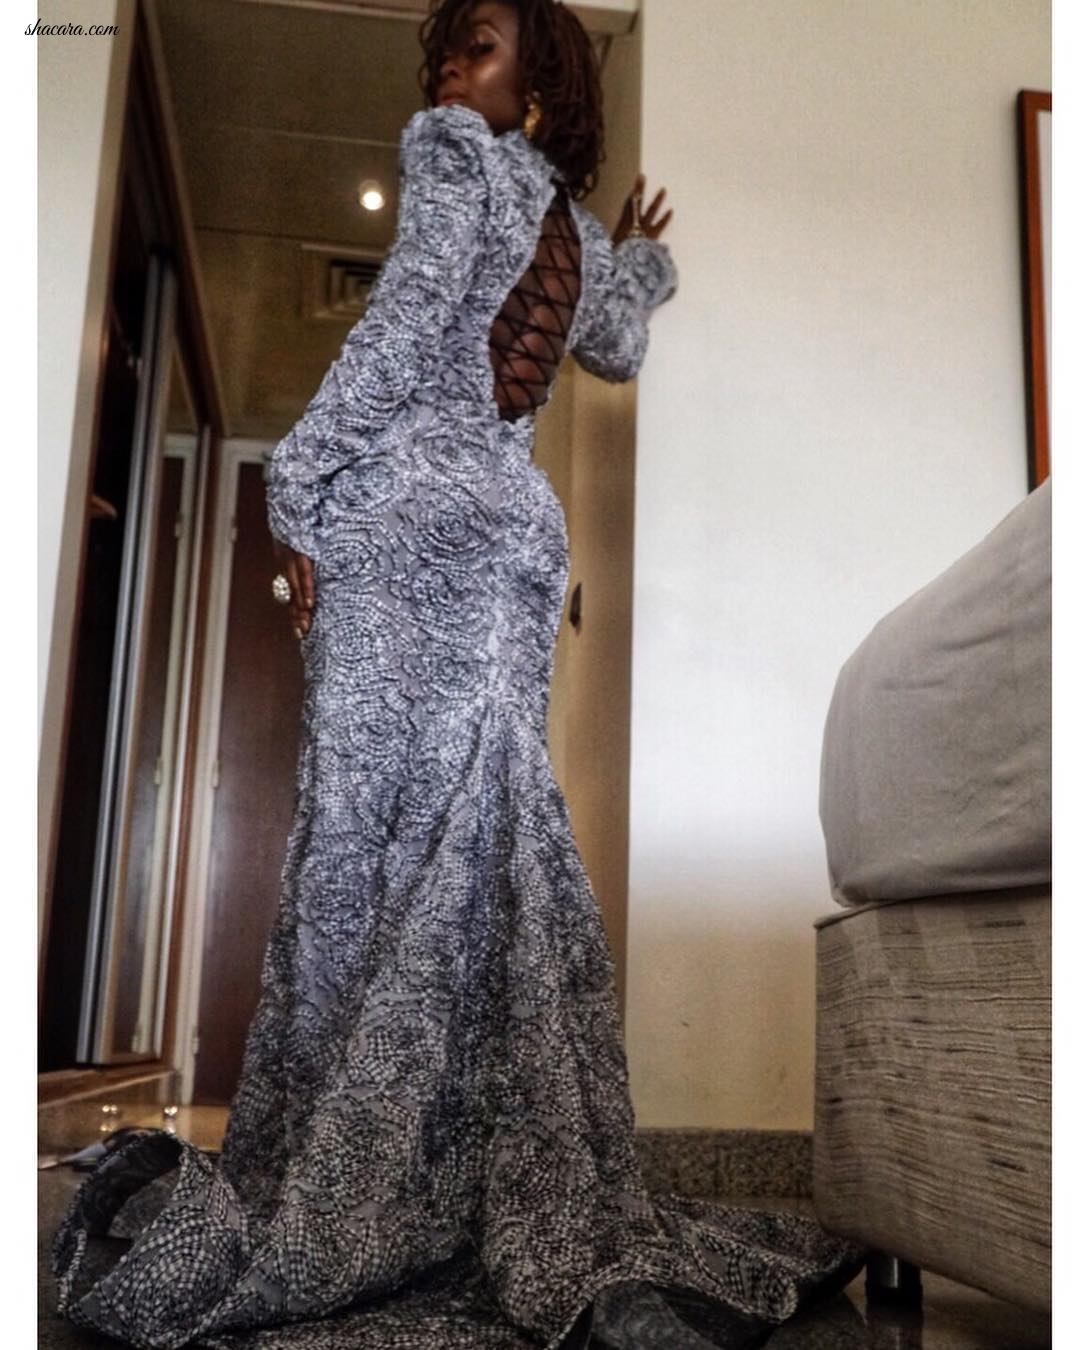 Folu Storms Pulled Out All The Stops At The 2019 #UBACEOAwards In This Platinum Dress